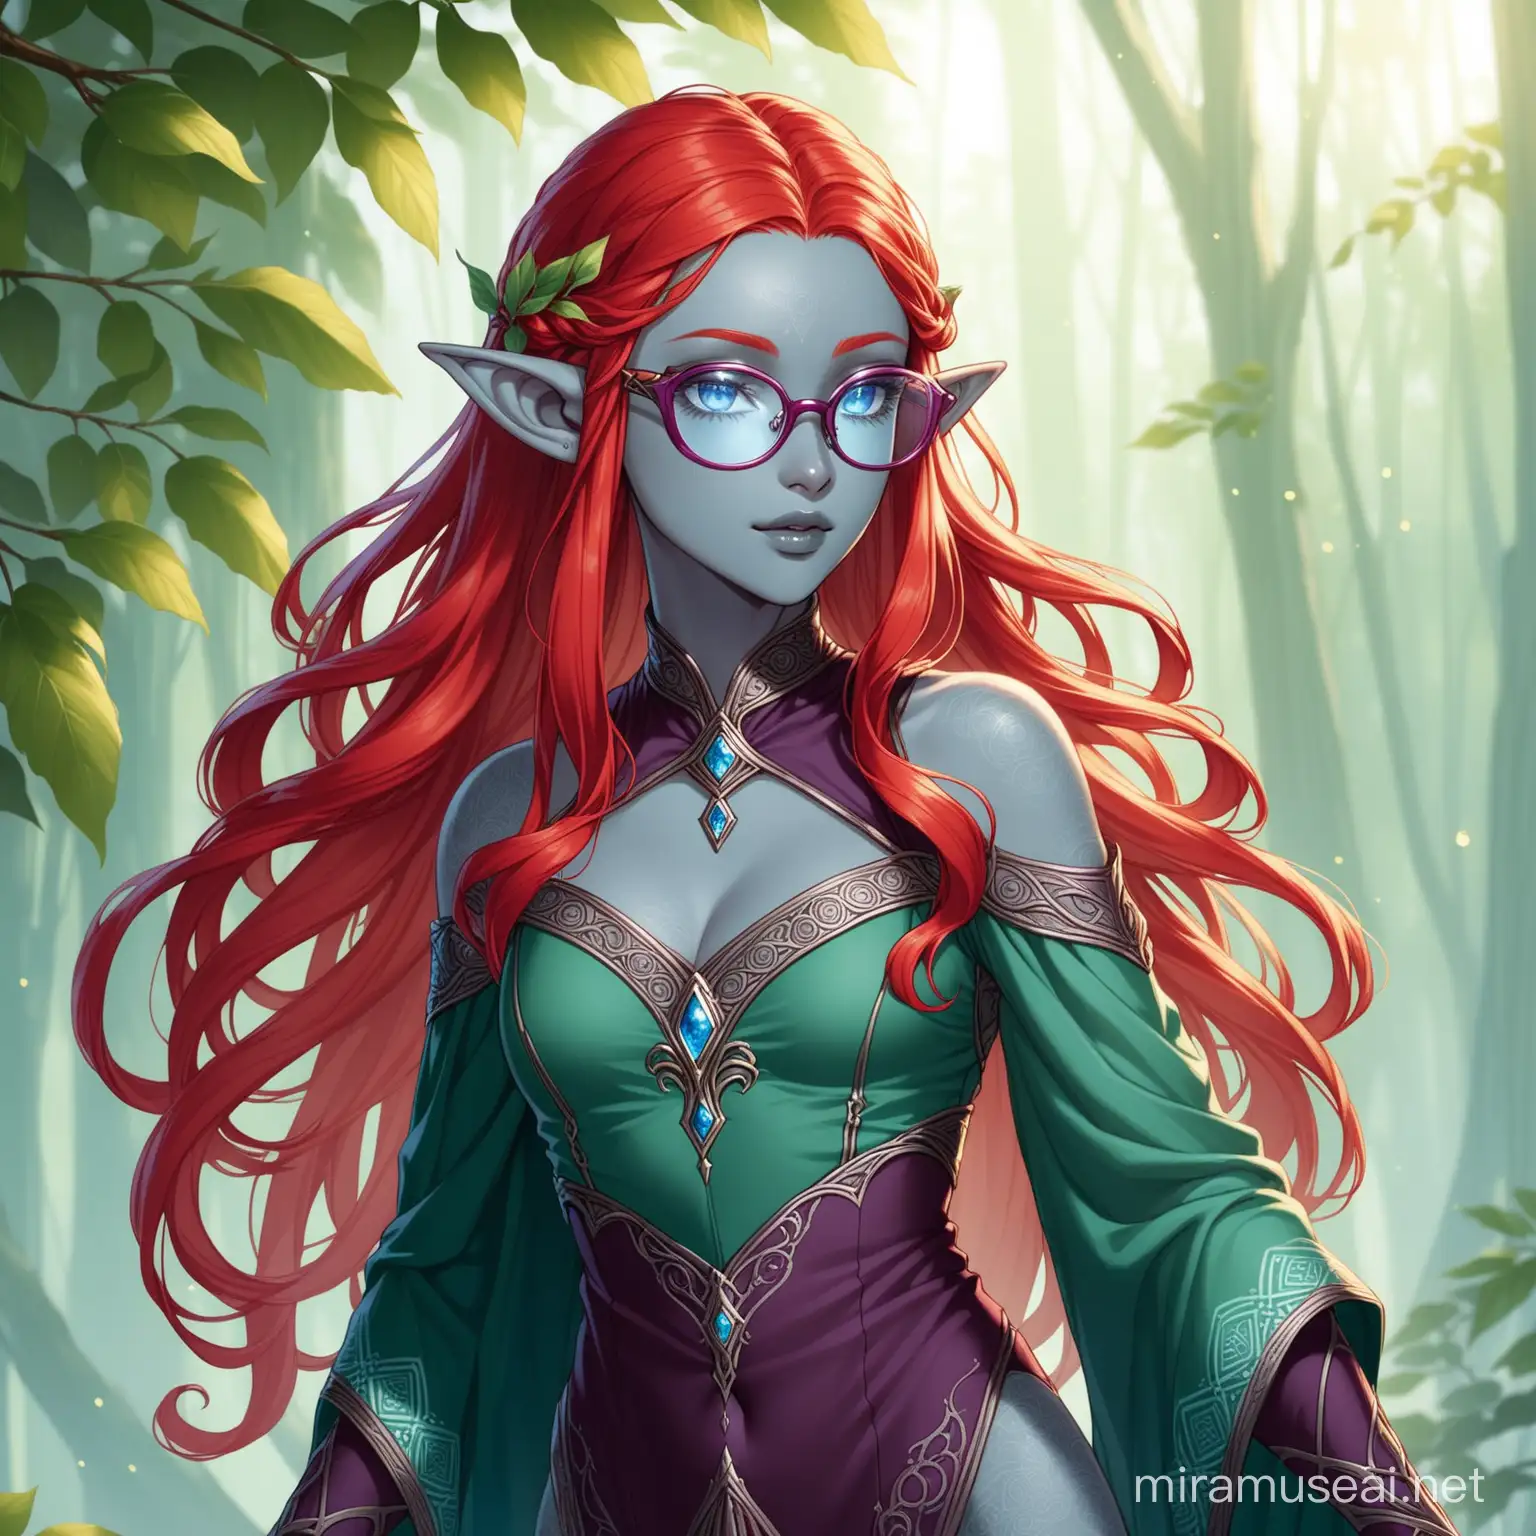 elven female with gray skin, has long curly red hair, wears blue lensed glasses, wearing plum erudite clothing